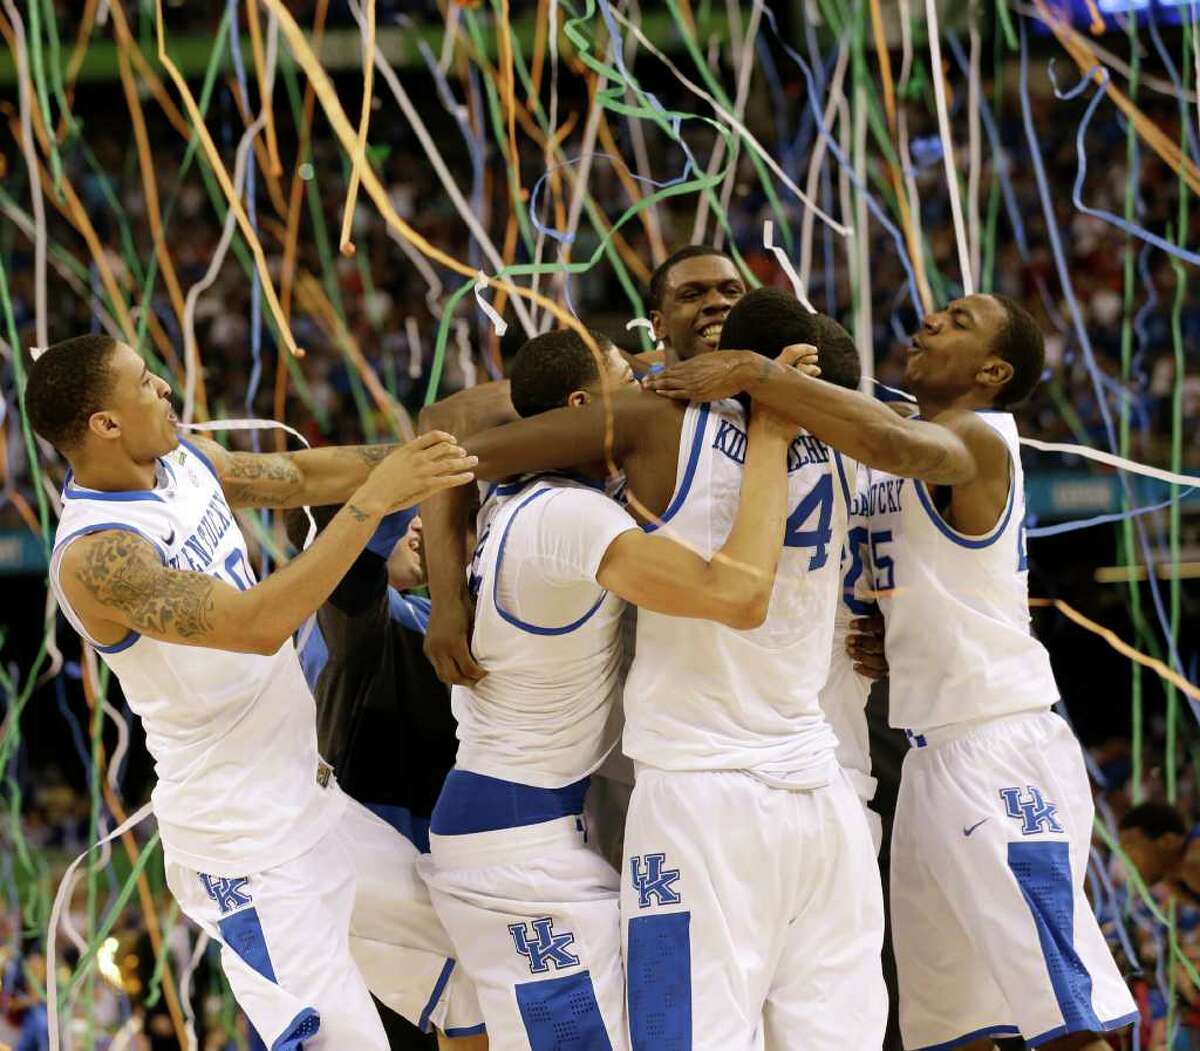 Kentucky players celebrate the school's eighth national title - and first since 1998 - after defeating Kansas on Monday.